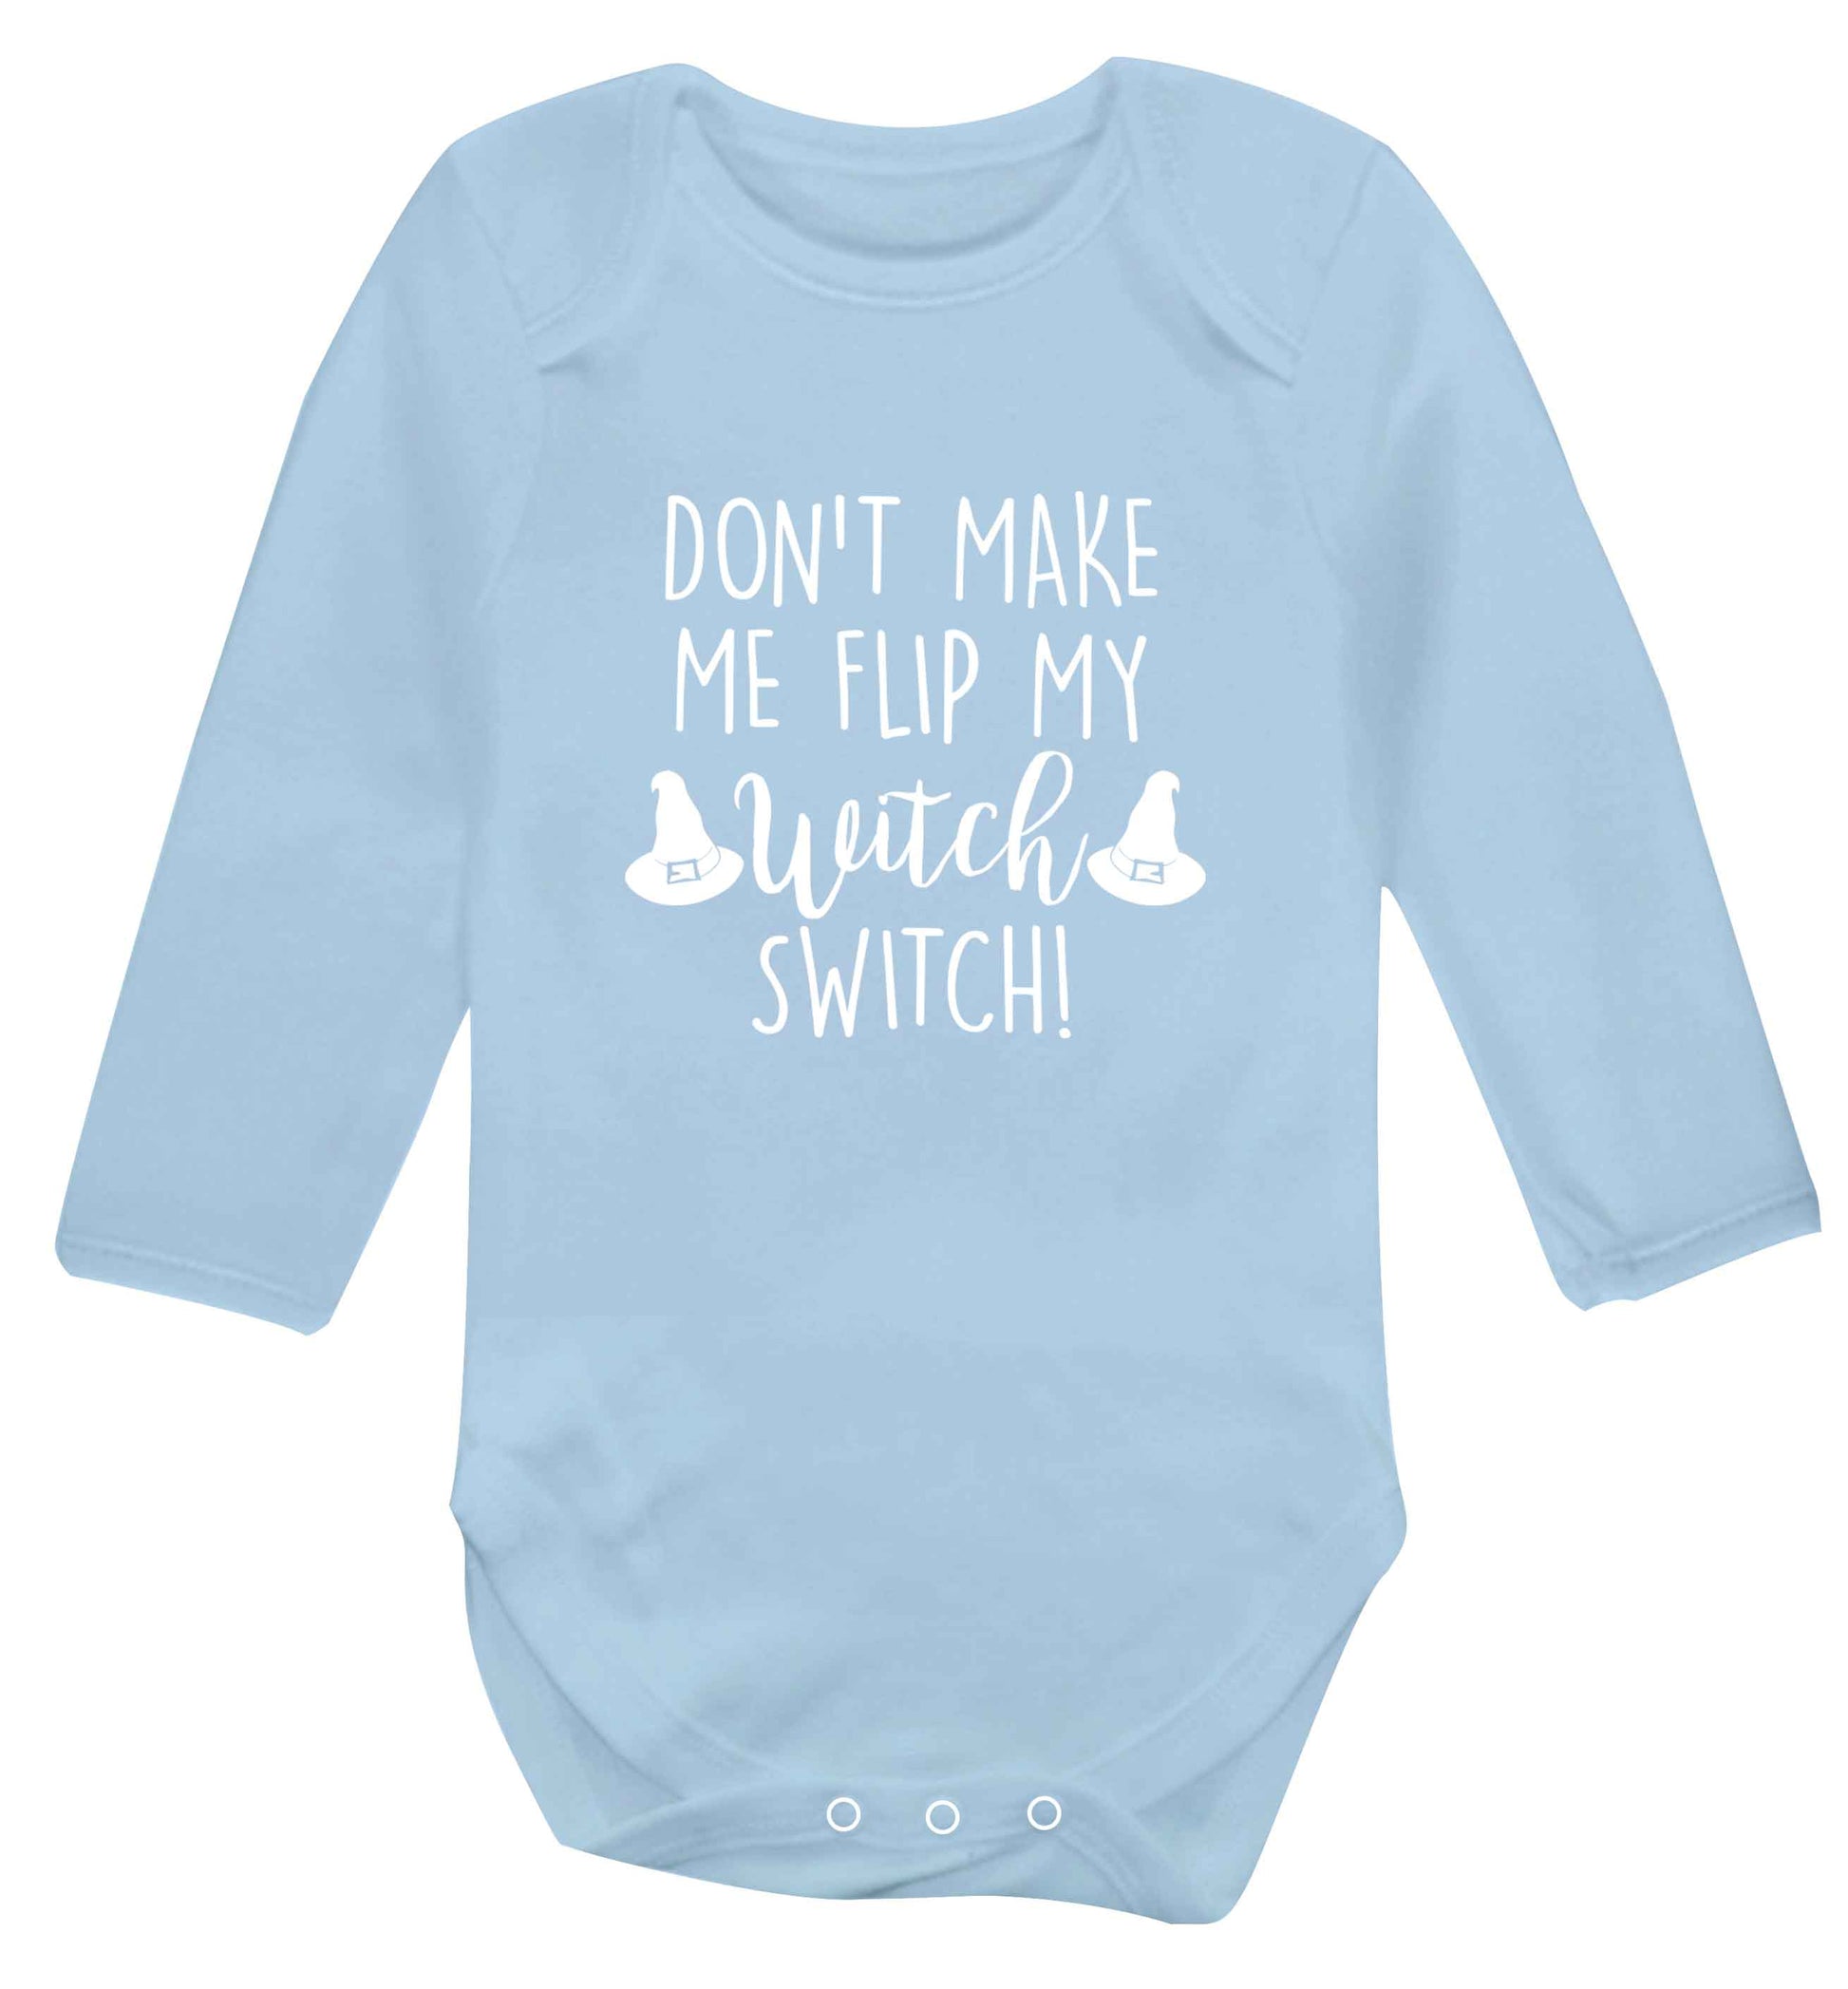 Don't make me flip my witch switch baby vest long sleeved pale blue 6-12 months